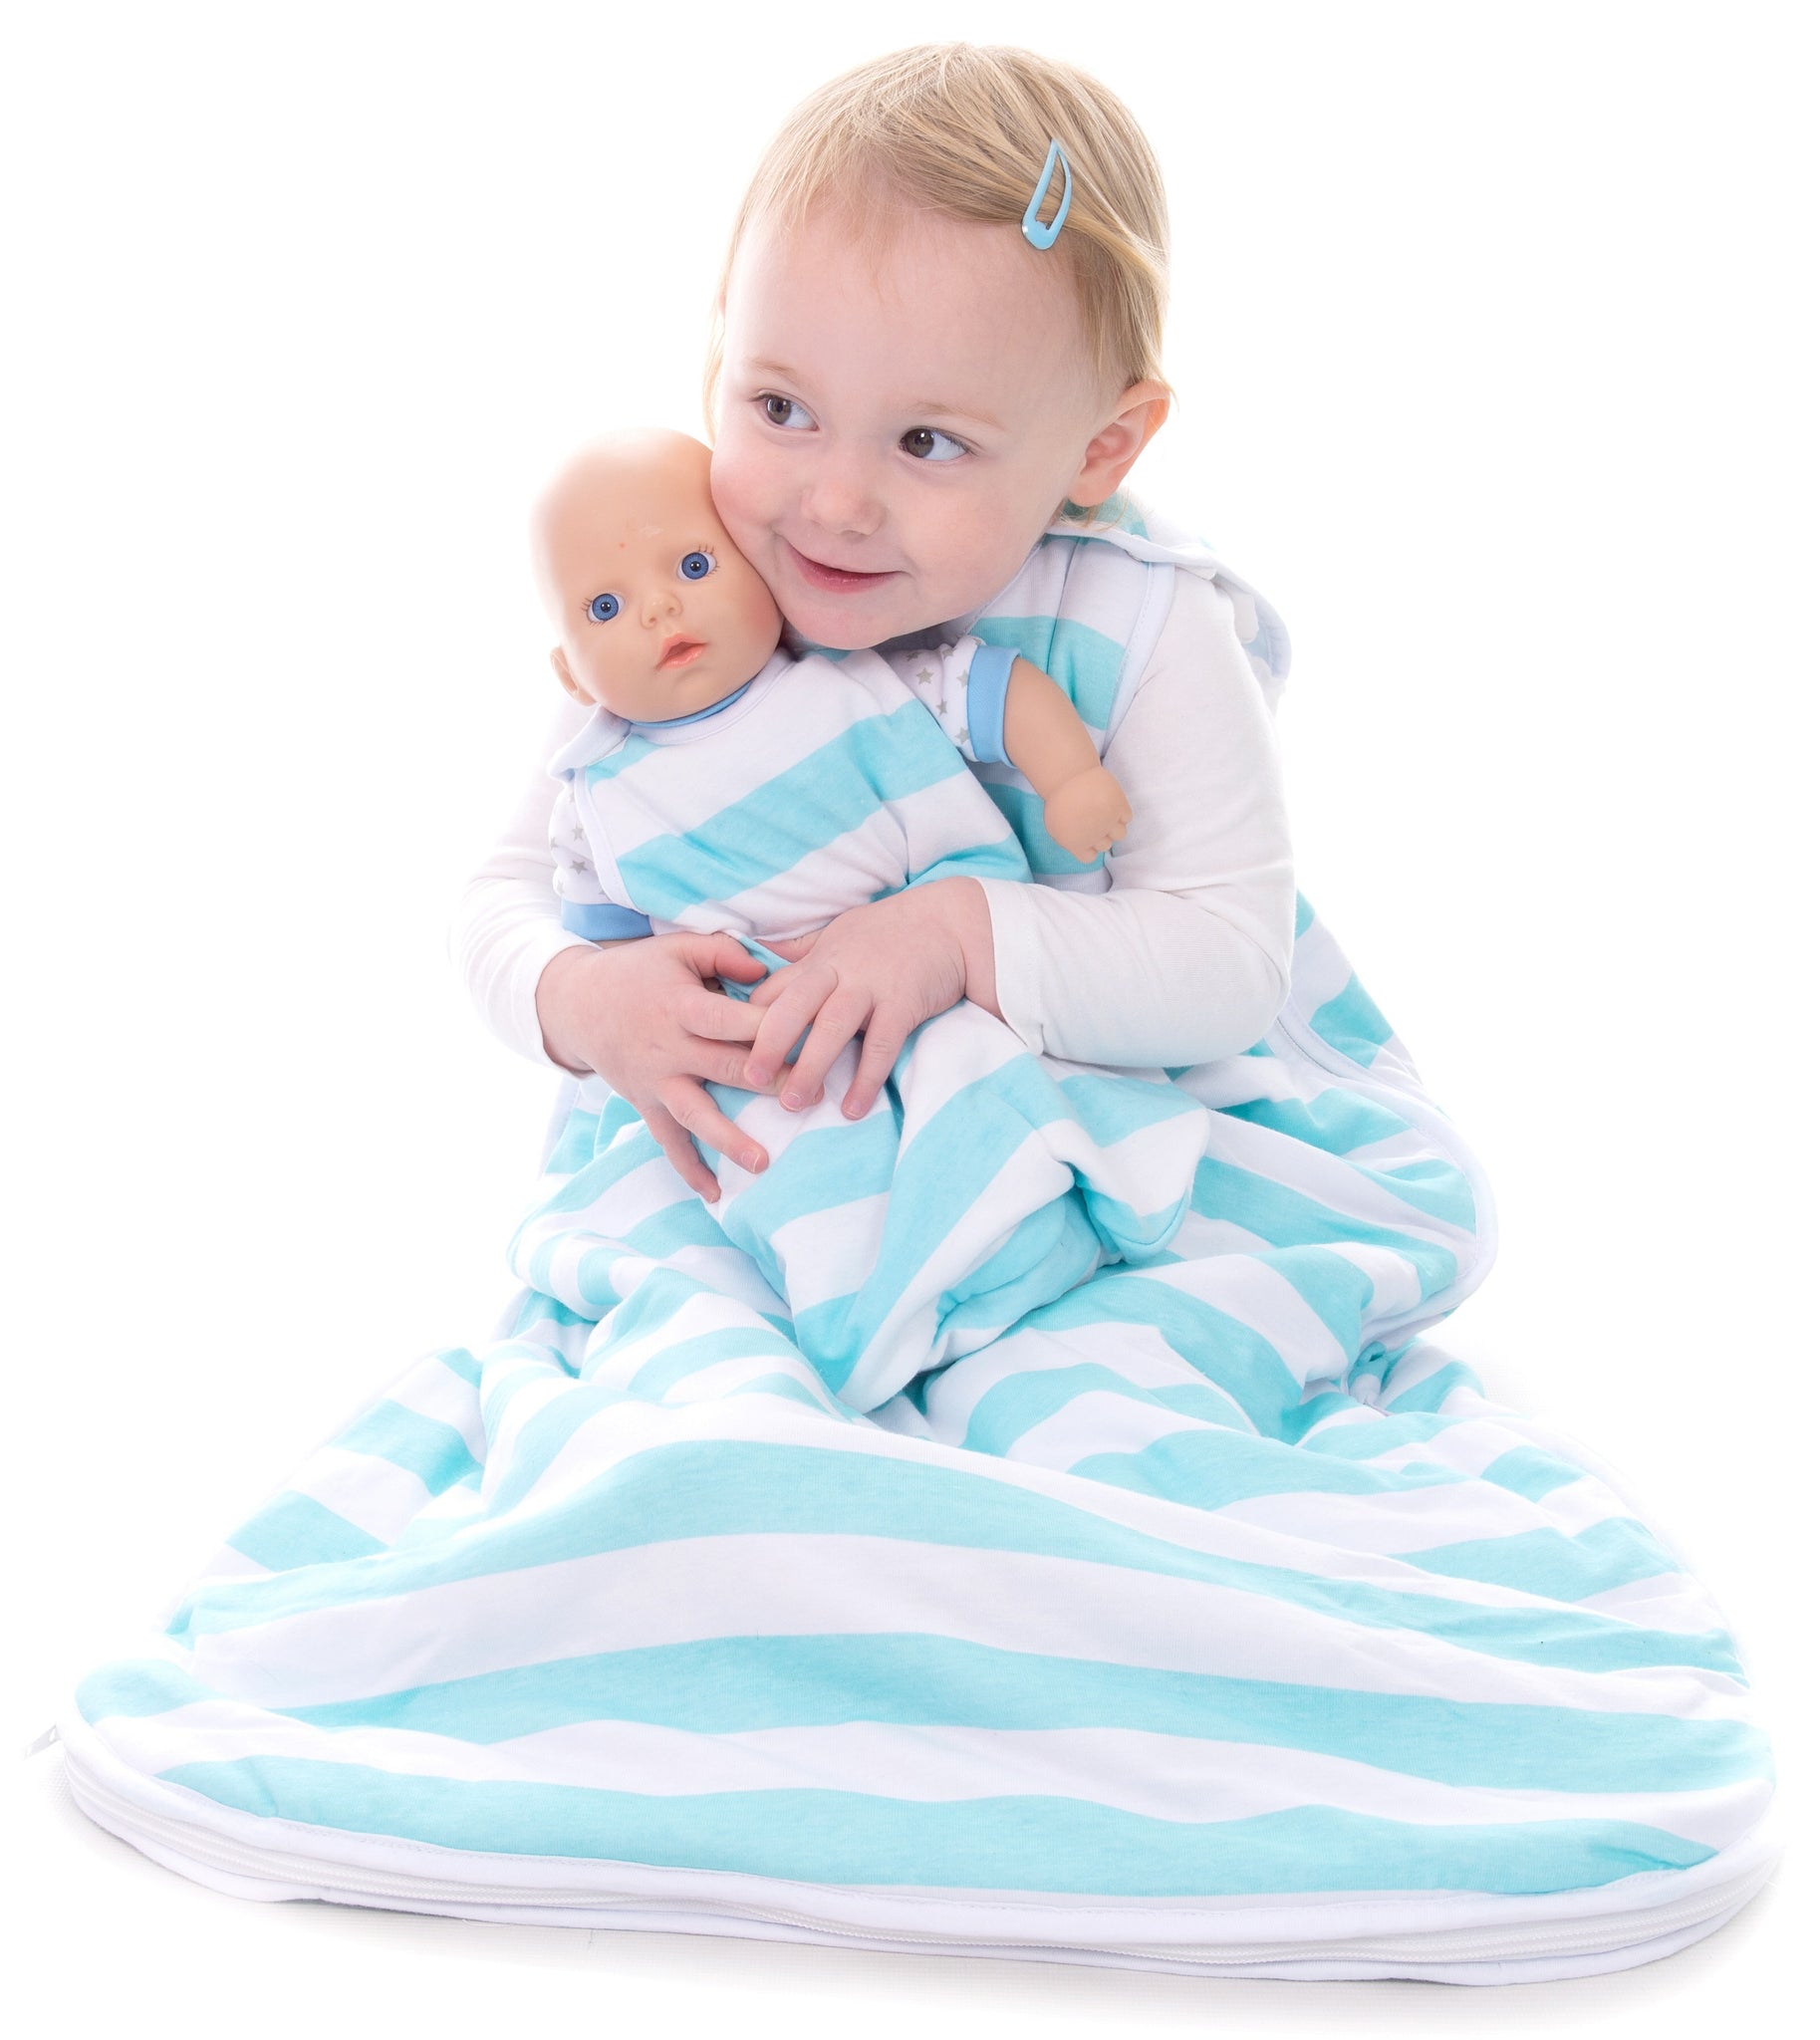 Snoozebag Doll Baby Sleeping Bag Suitable For all Child Toy Dolls Accessory 100% Cotton - Island Paradise